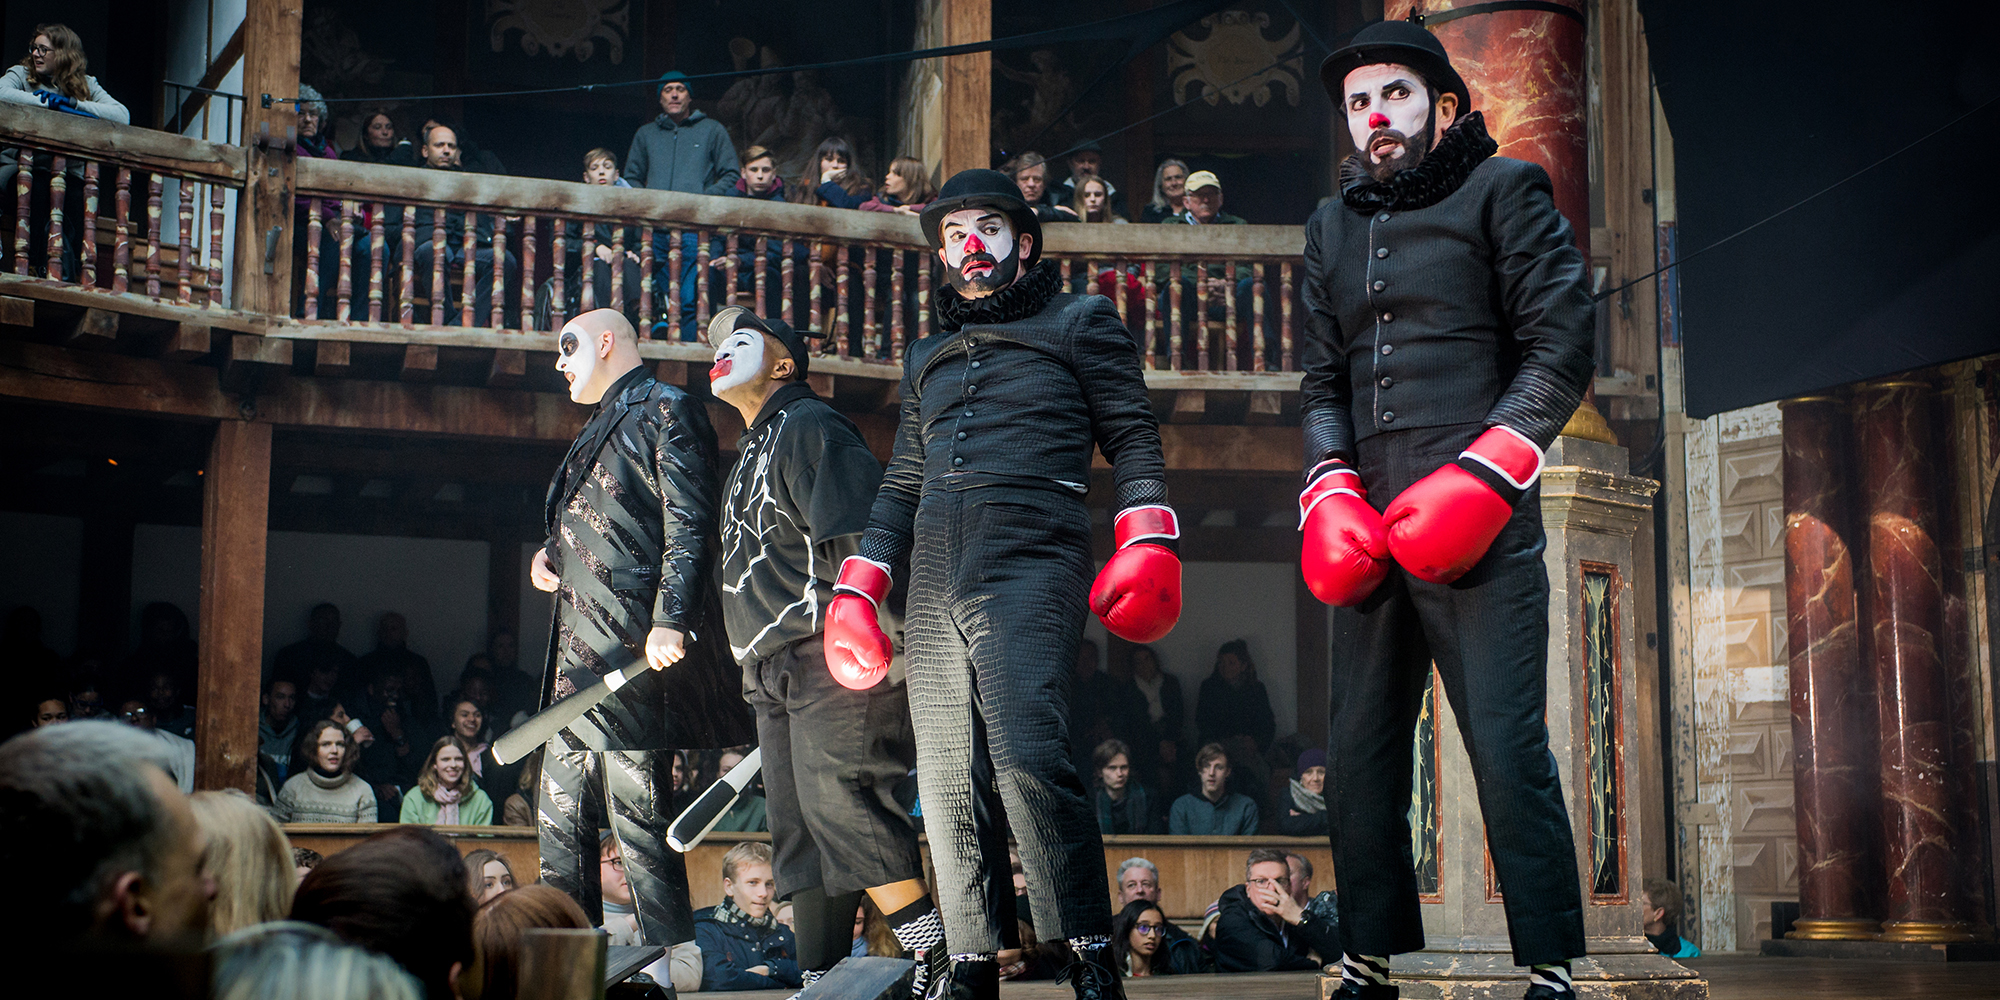 Four people wearing black, in clown makeup, and wearing red boxing gloves.